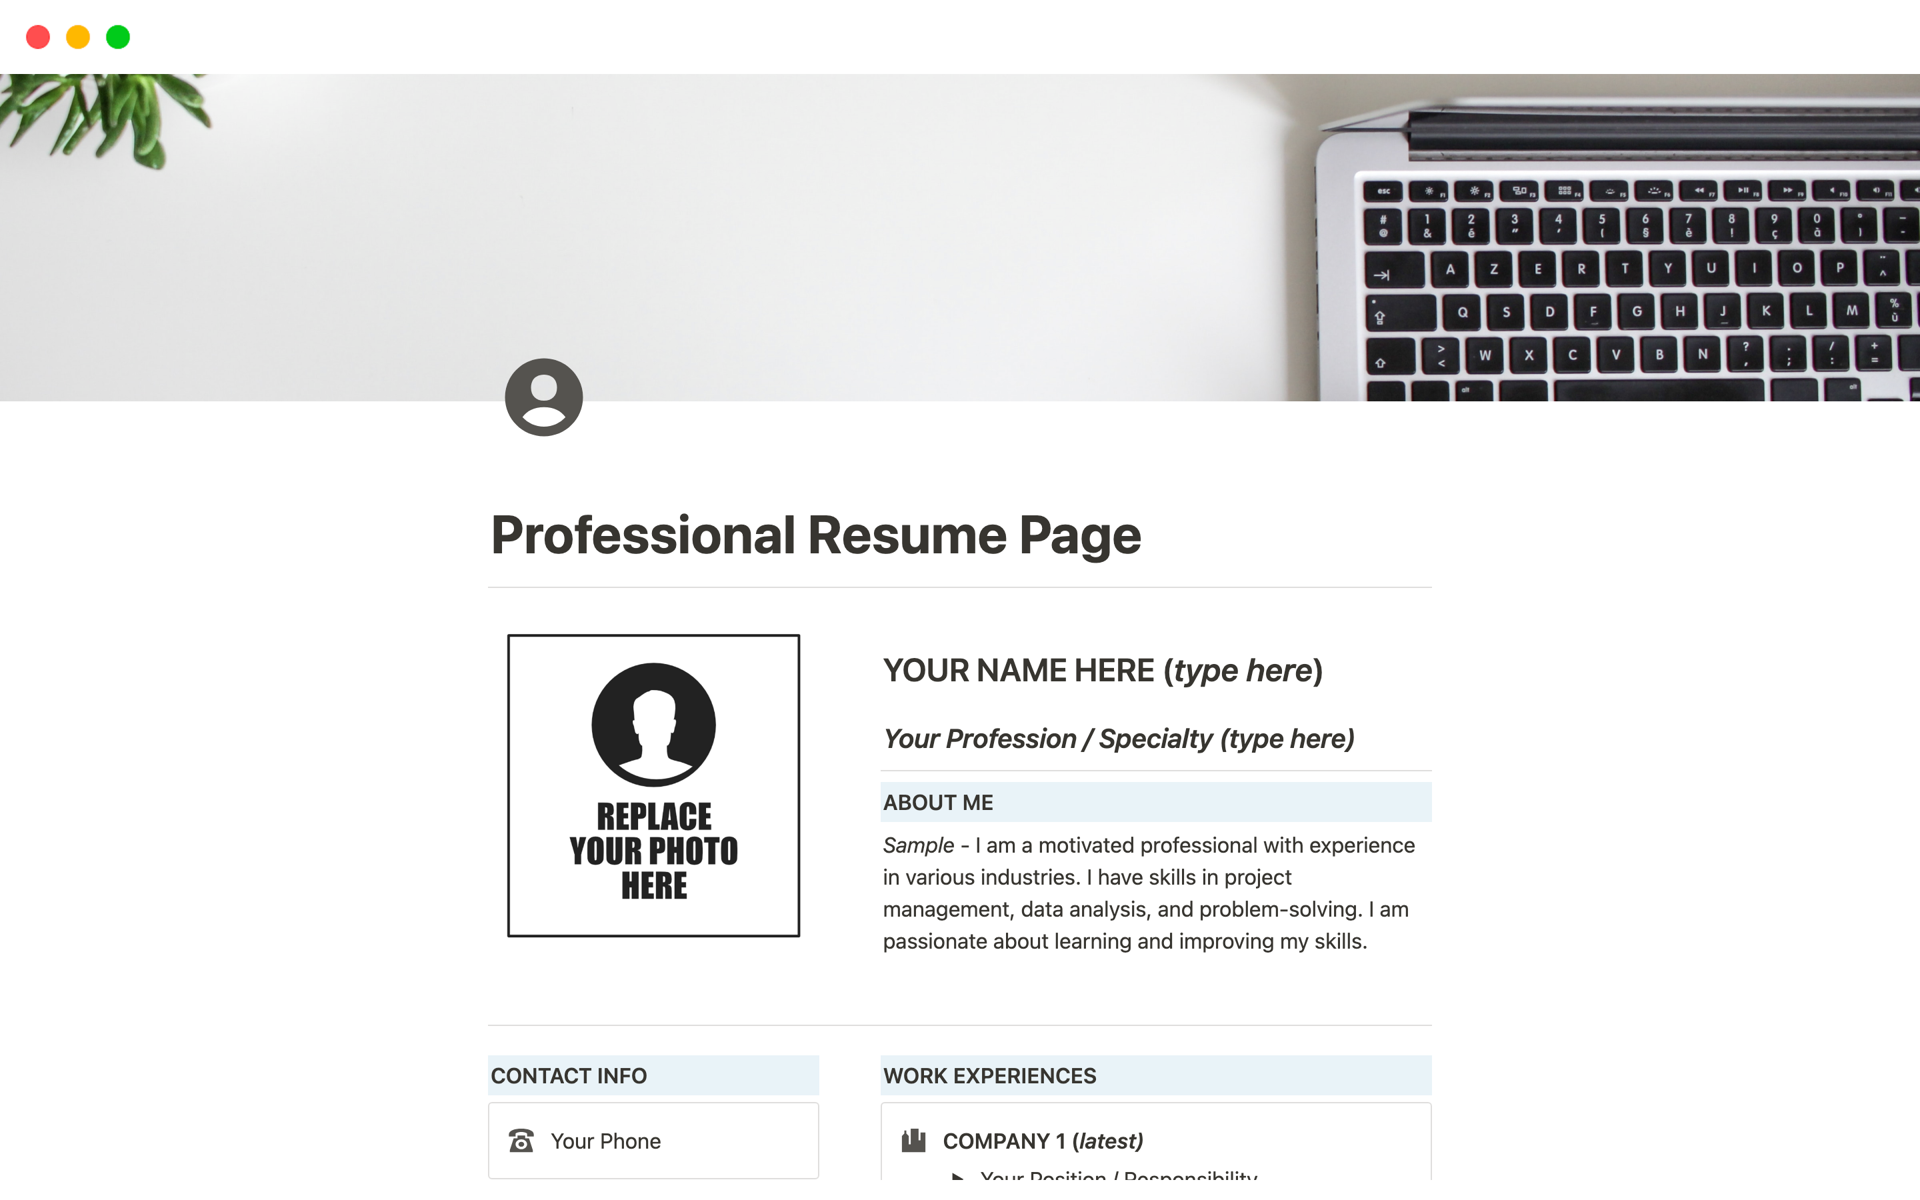 A template preview for Notion Professional Resume Page